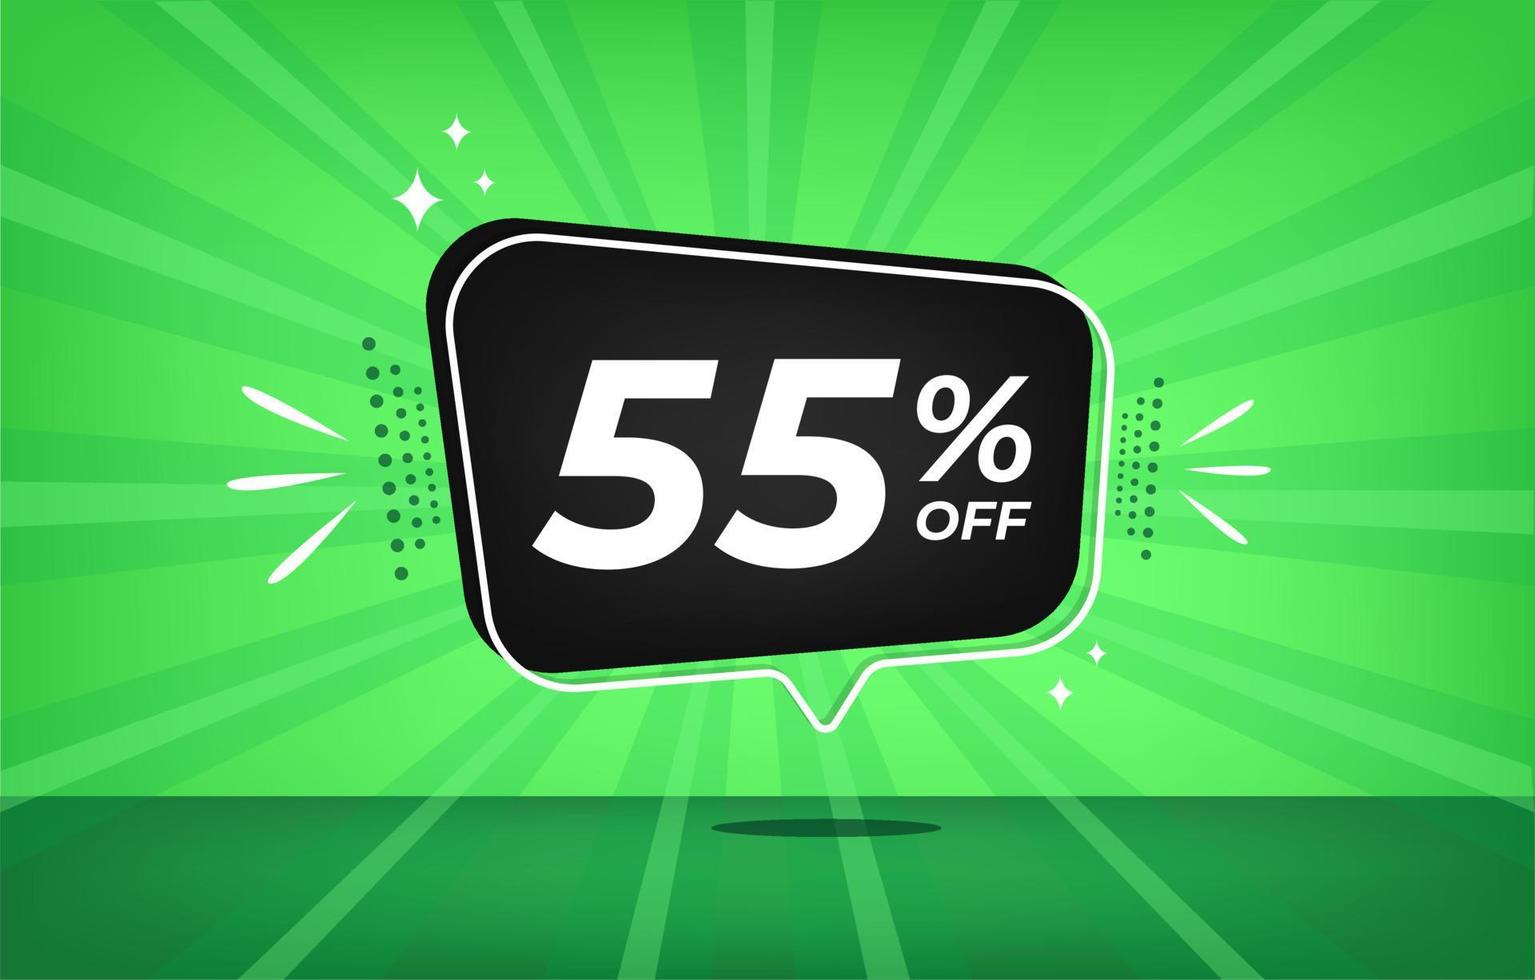 55 percent off. Green banner with fifty-five percent discount on a black balloon for mega big sales. vector